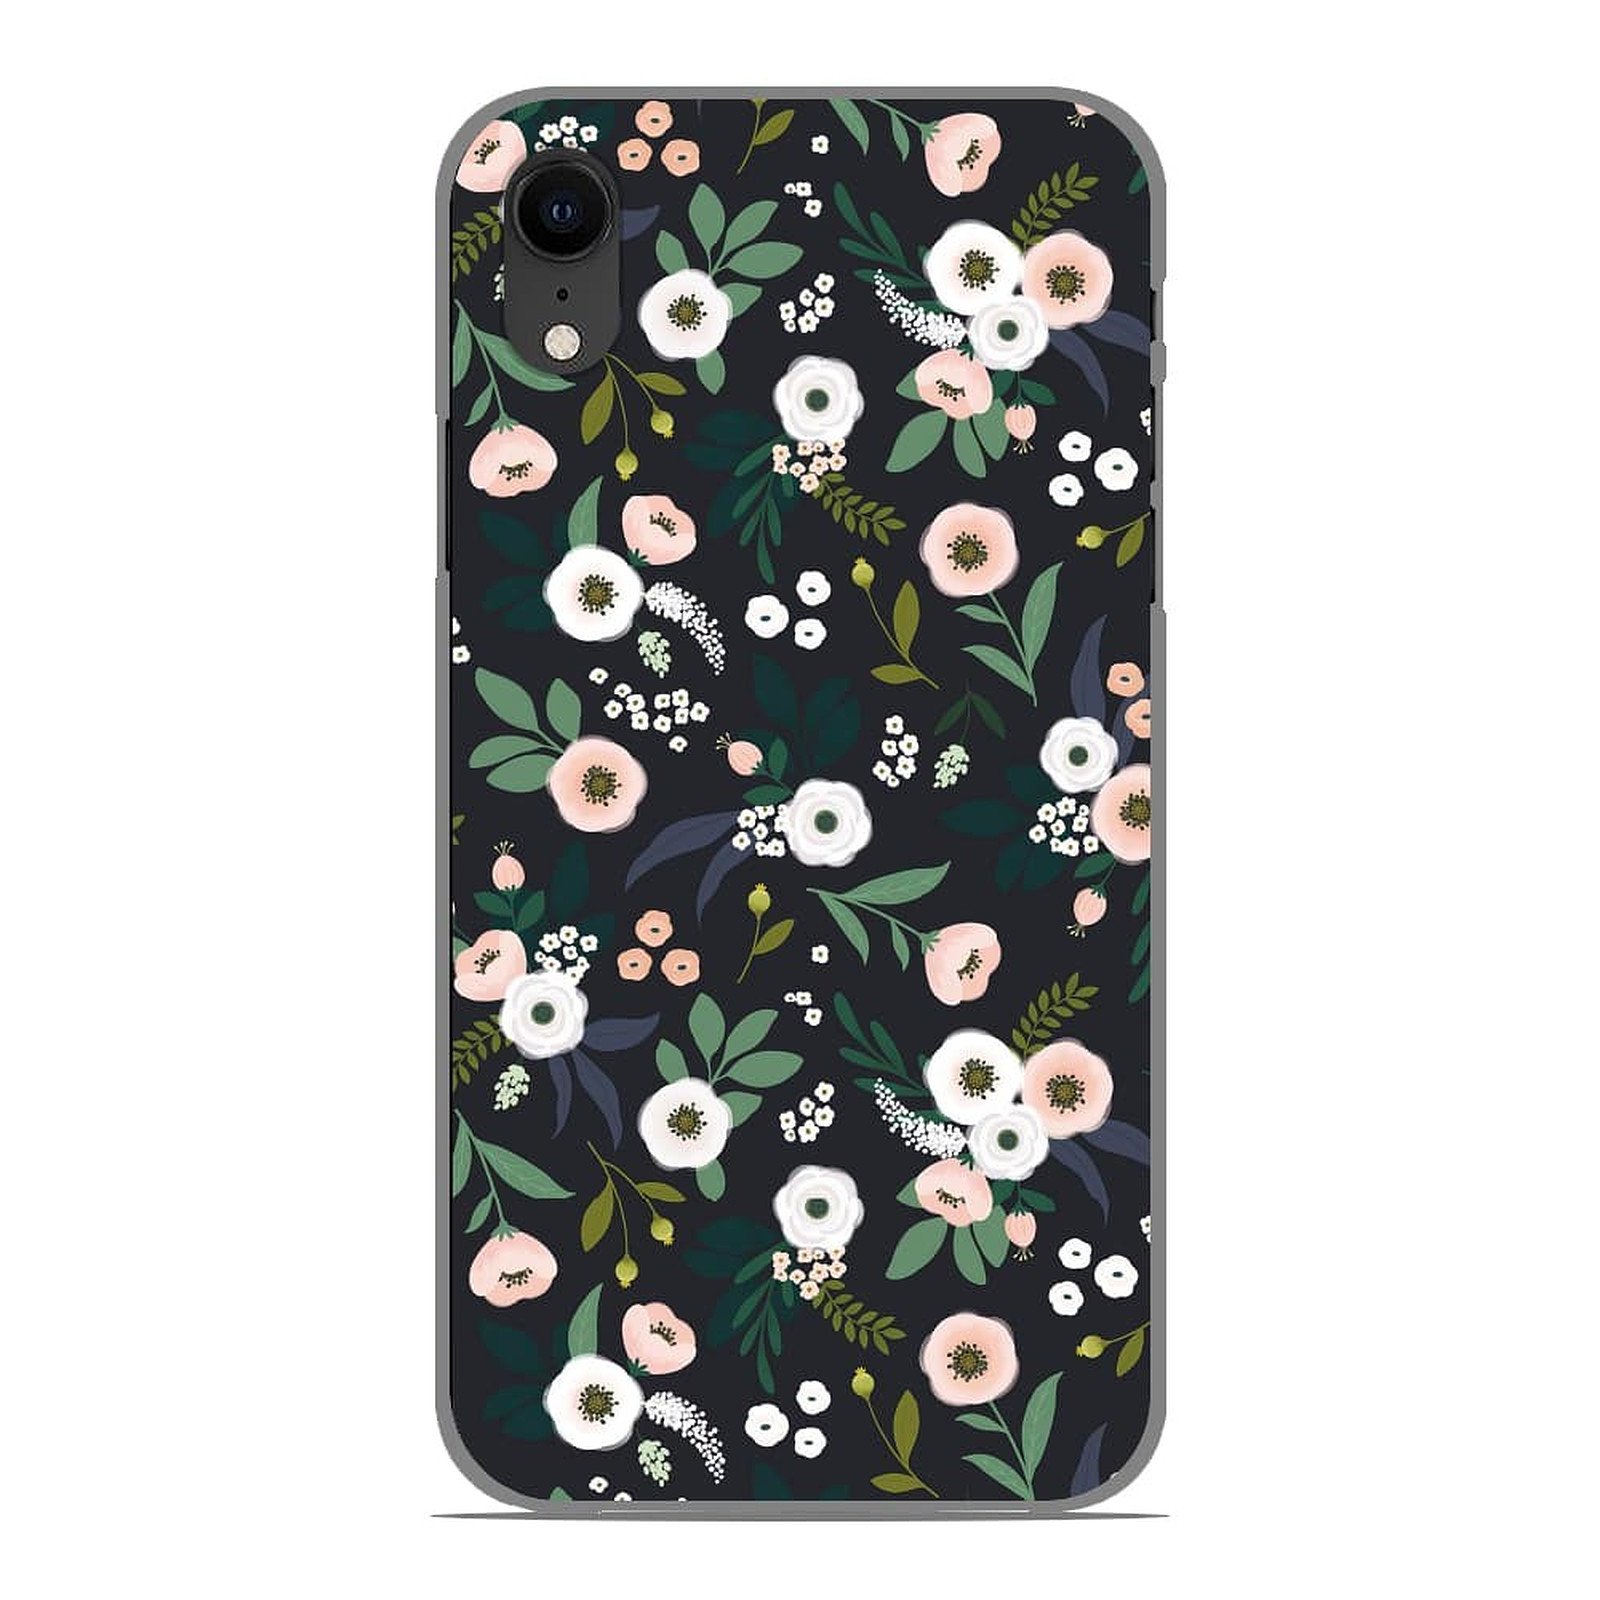 1001 Coques Coque silicone gel Apple iPhone XR motif Flowers Noir - Coque telephone 1001Coques